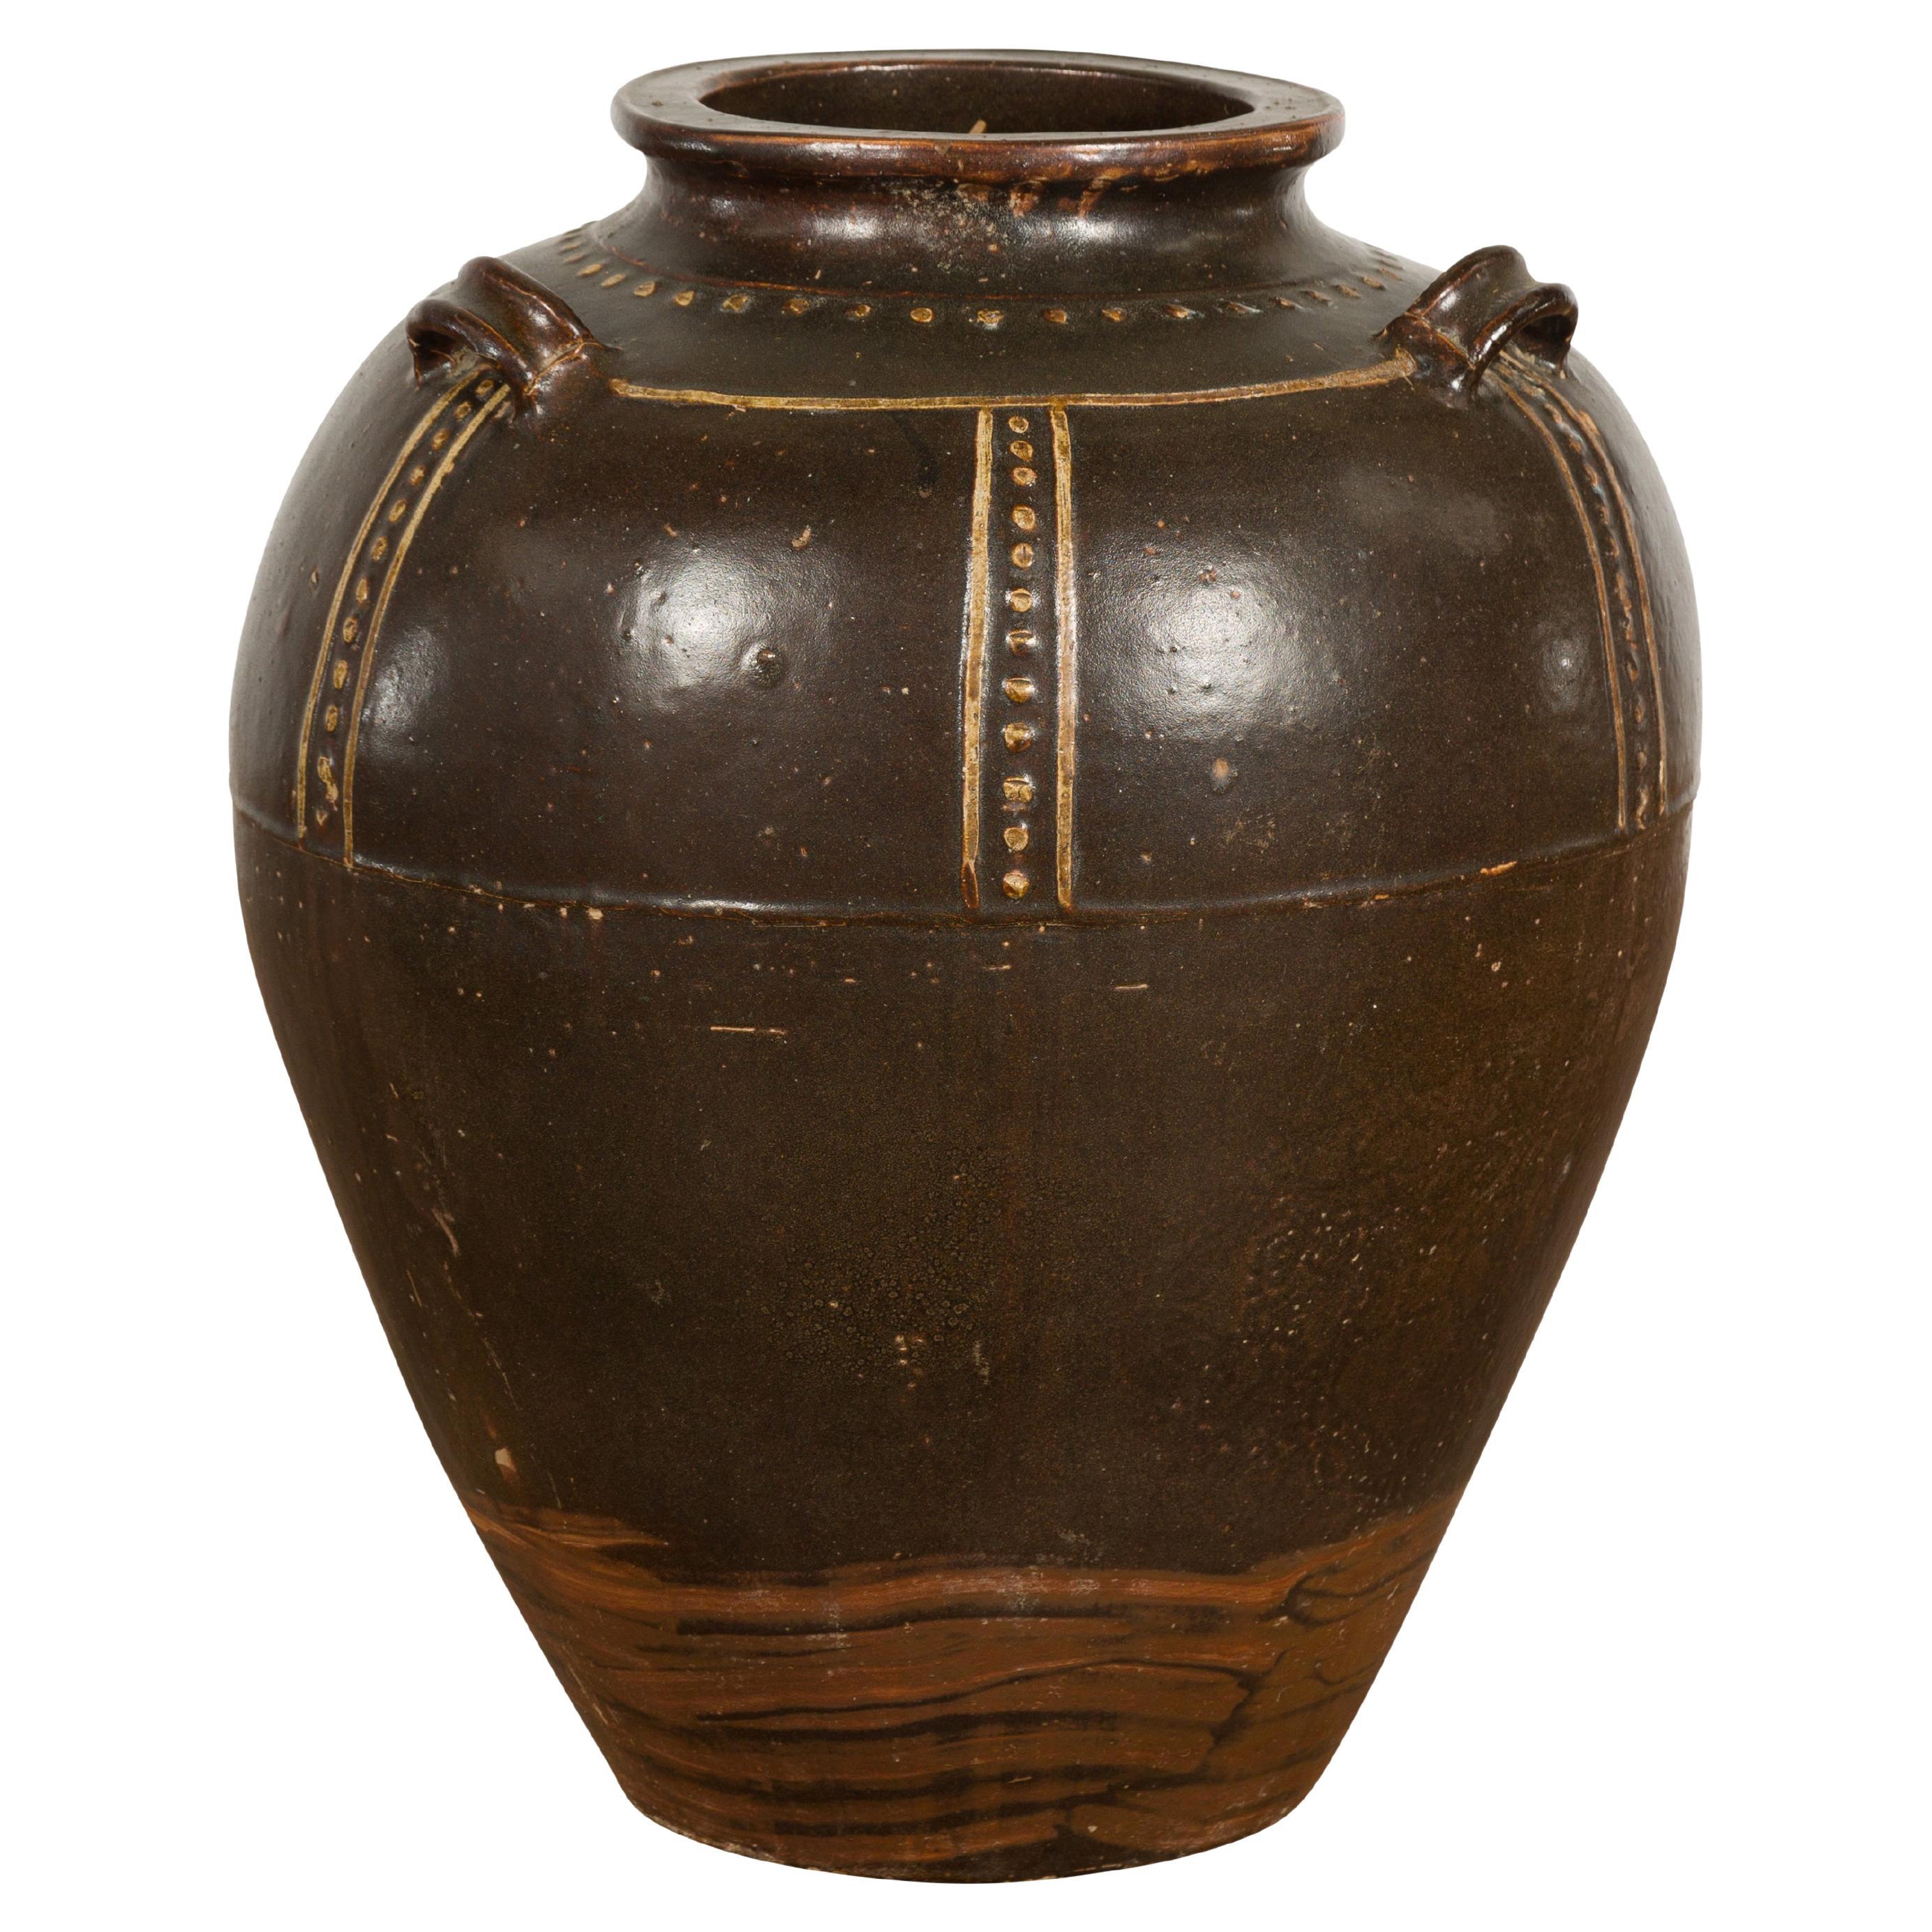 Thai Brown Glazed Ceramic Vase with Loop Handles and Cream Dotted Décor